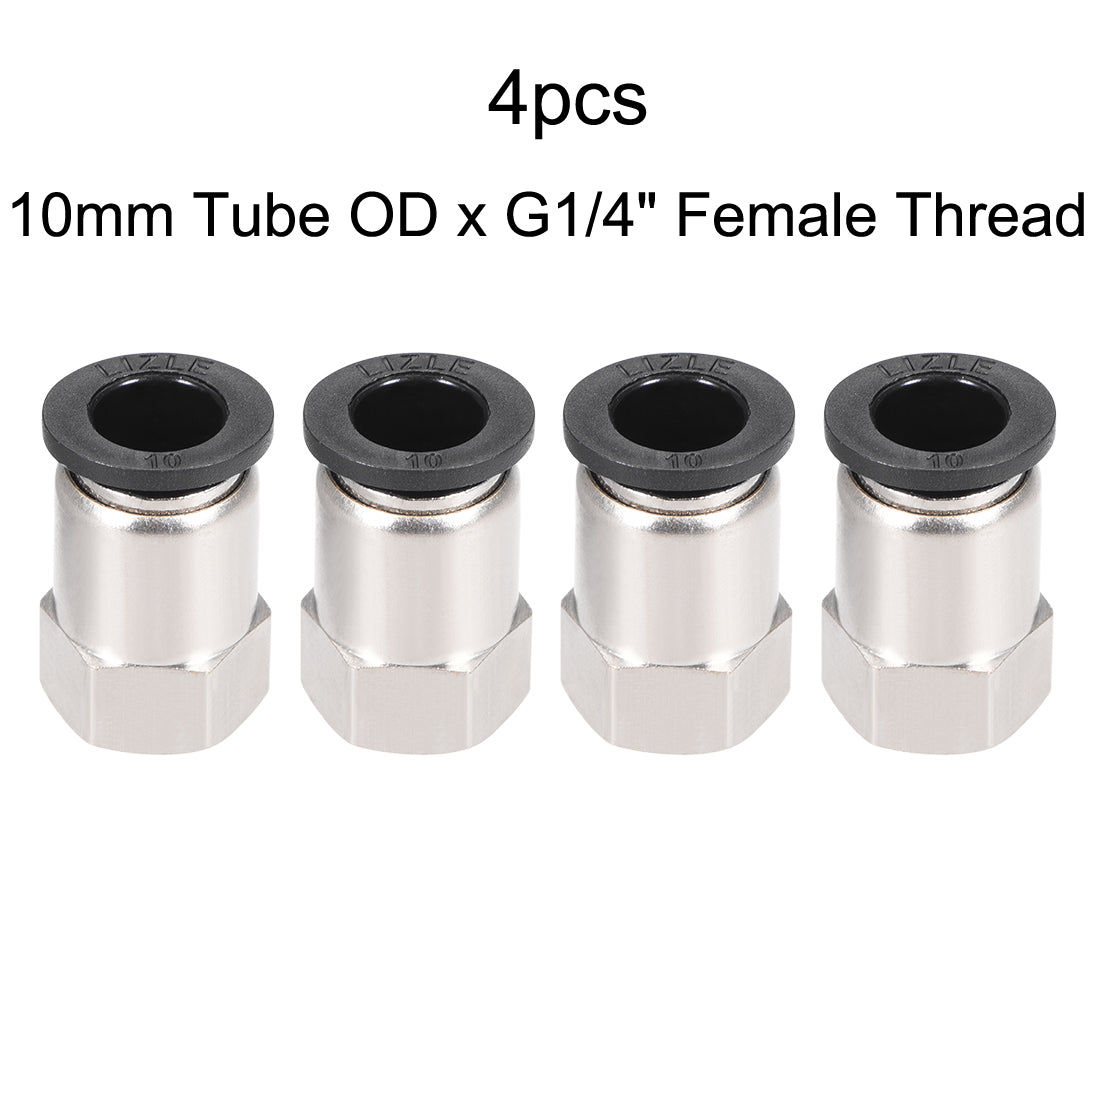 uxcell Uxcell Push to Connect Tube Fitting Adapter 10mm OD x 1/4PT Female Silver Tone 4pcs